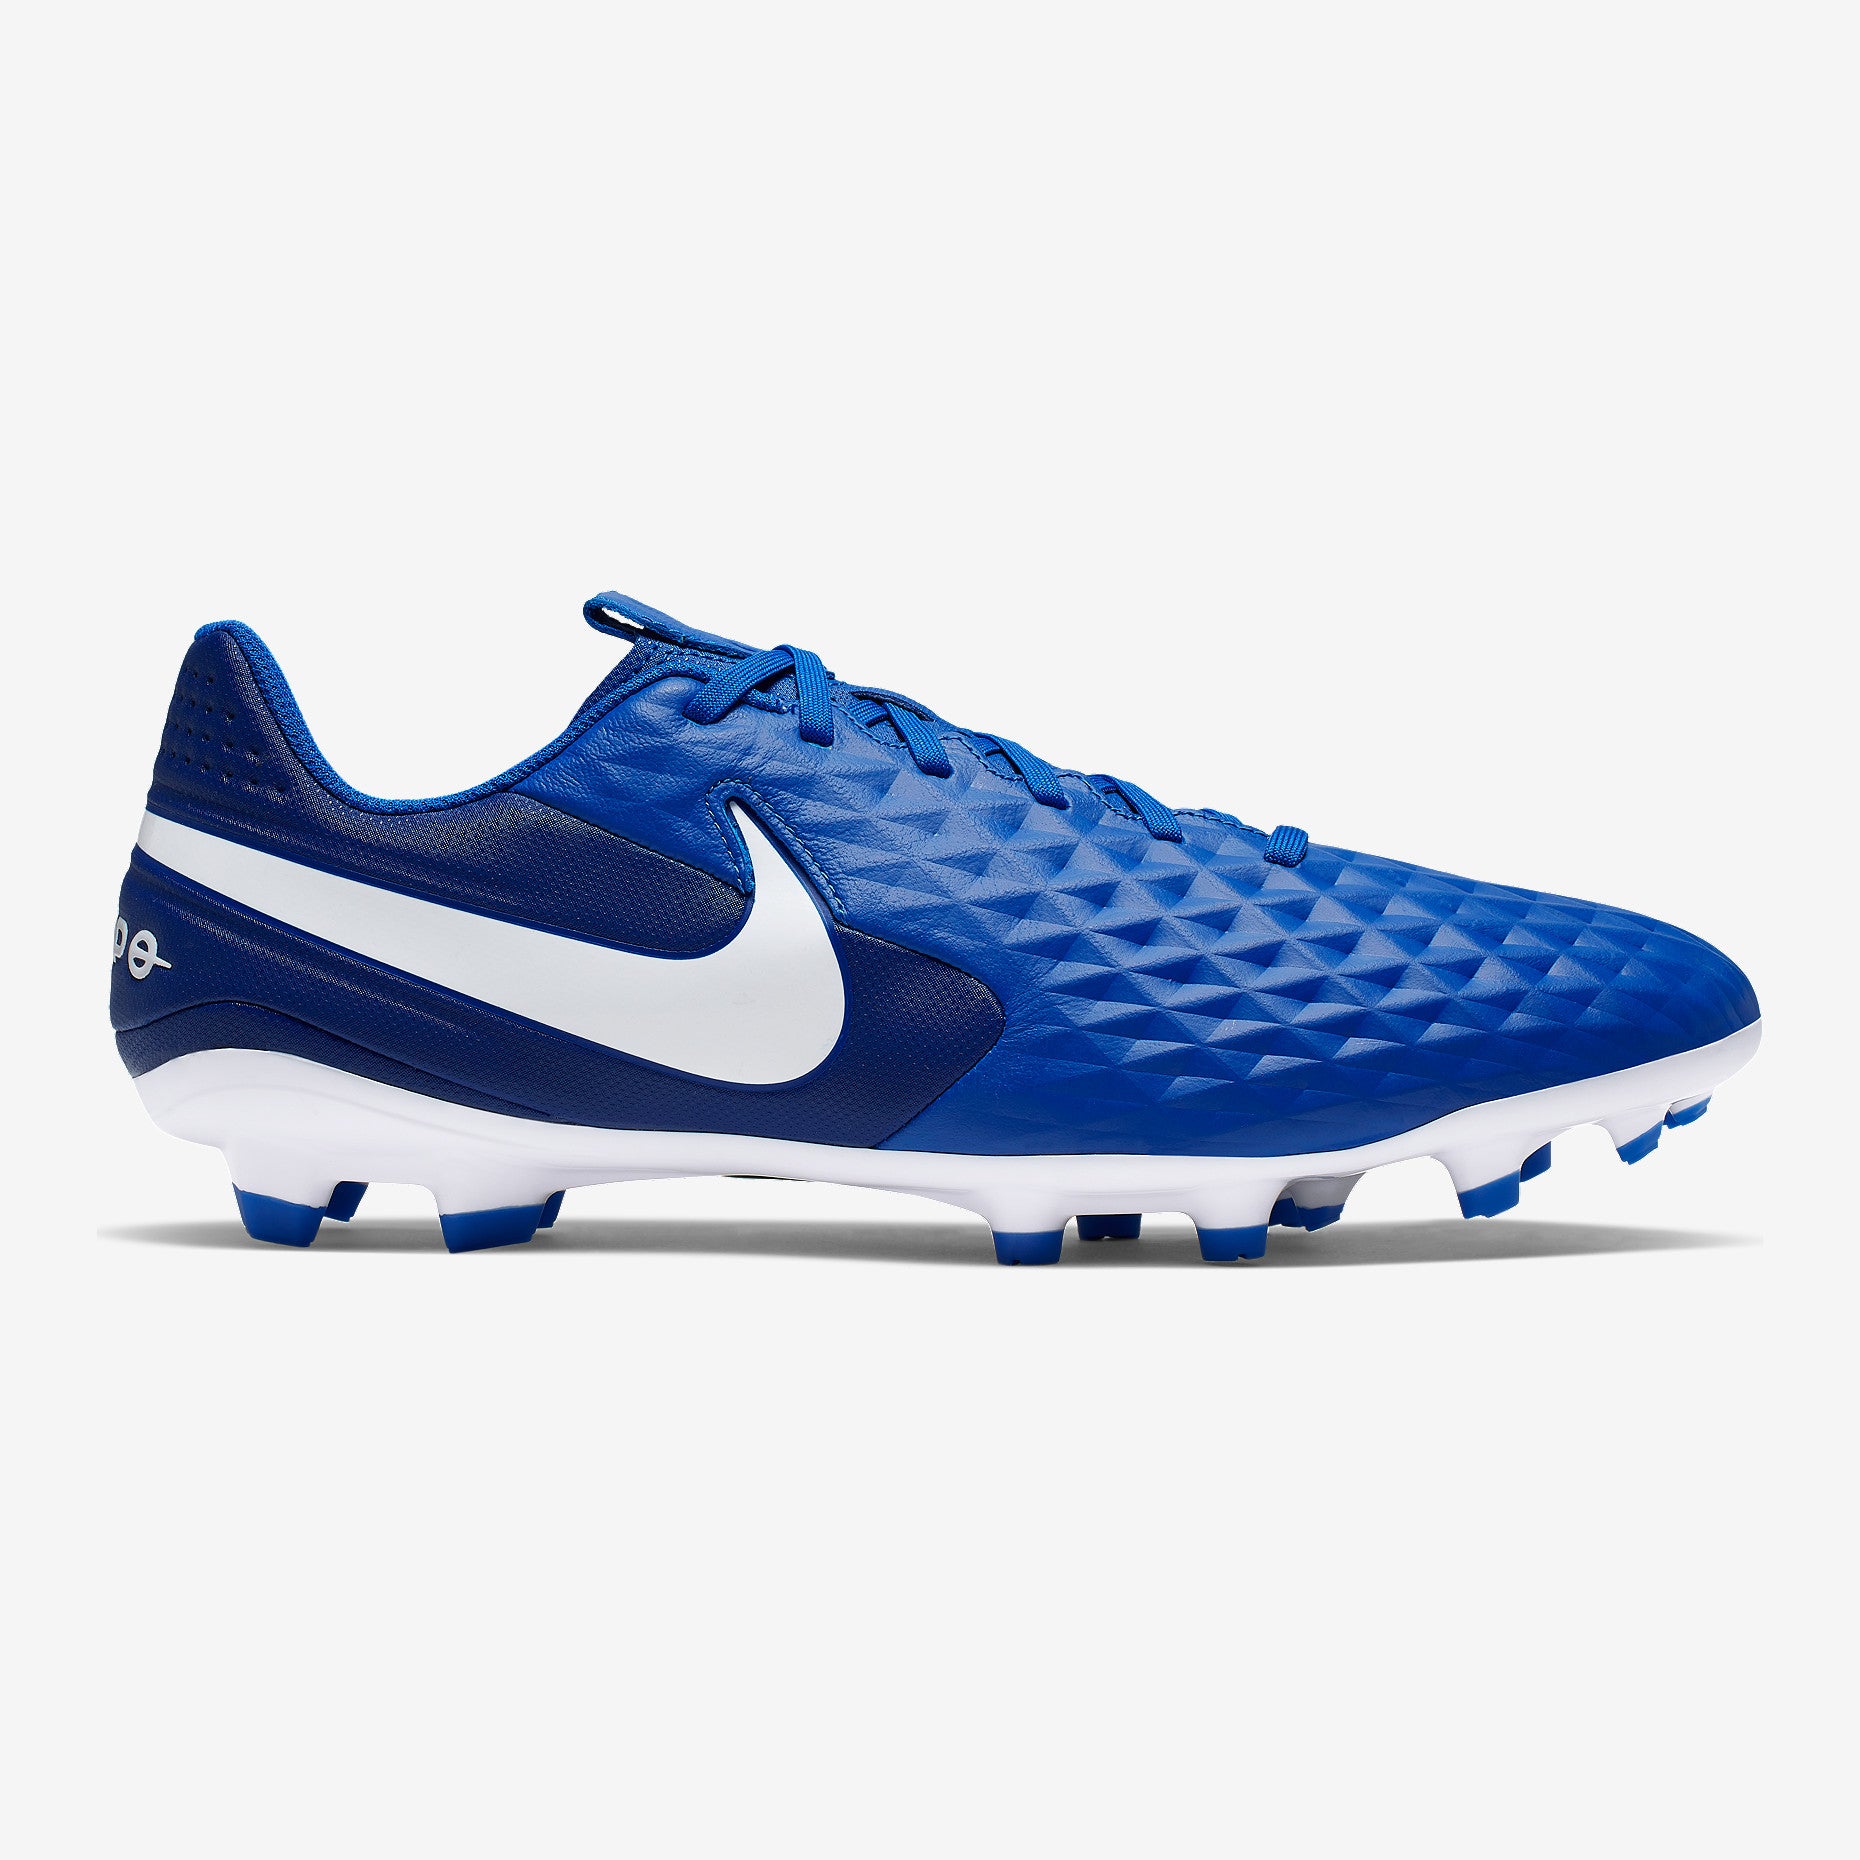 Nike Unisex Adults Time Legend 8 Academy Ic Soccer Shoe